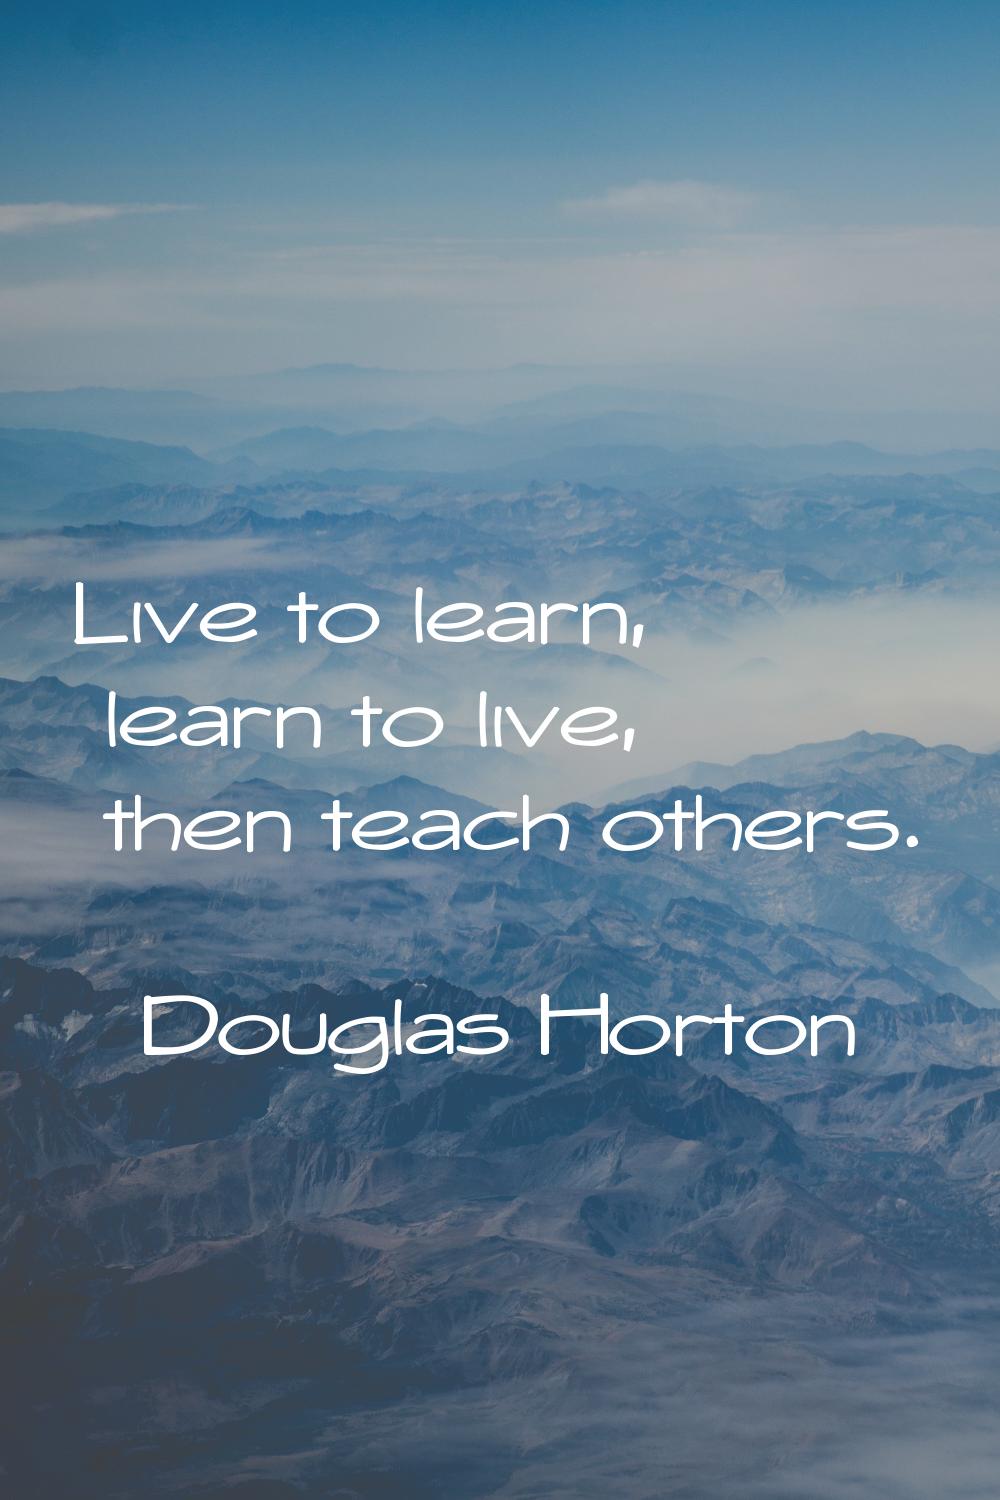 Live to learn, learn to live, then teach others.